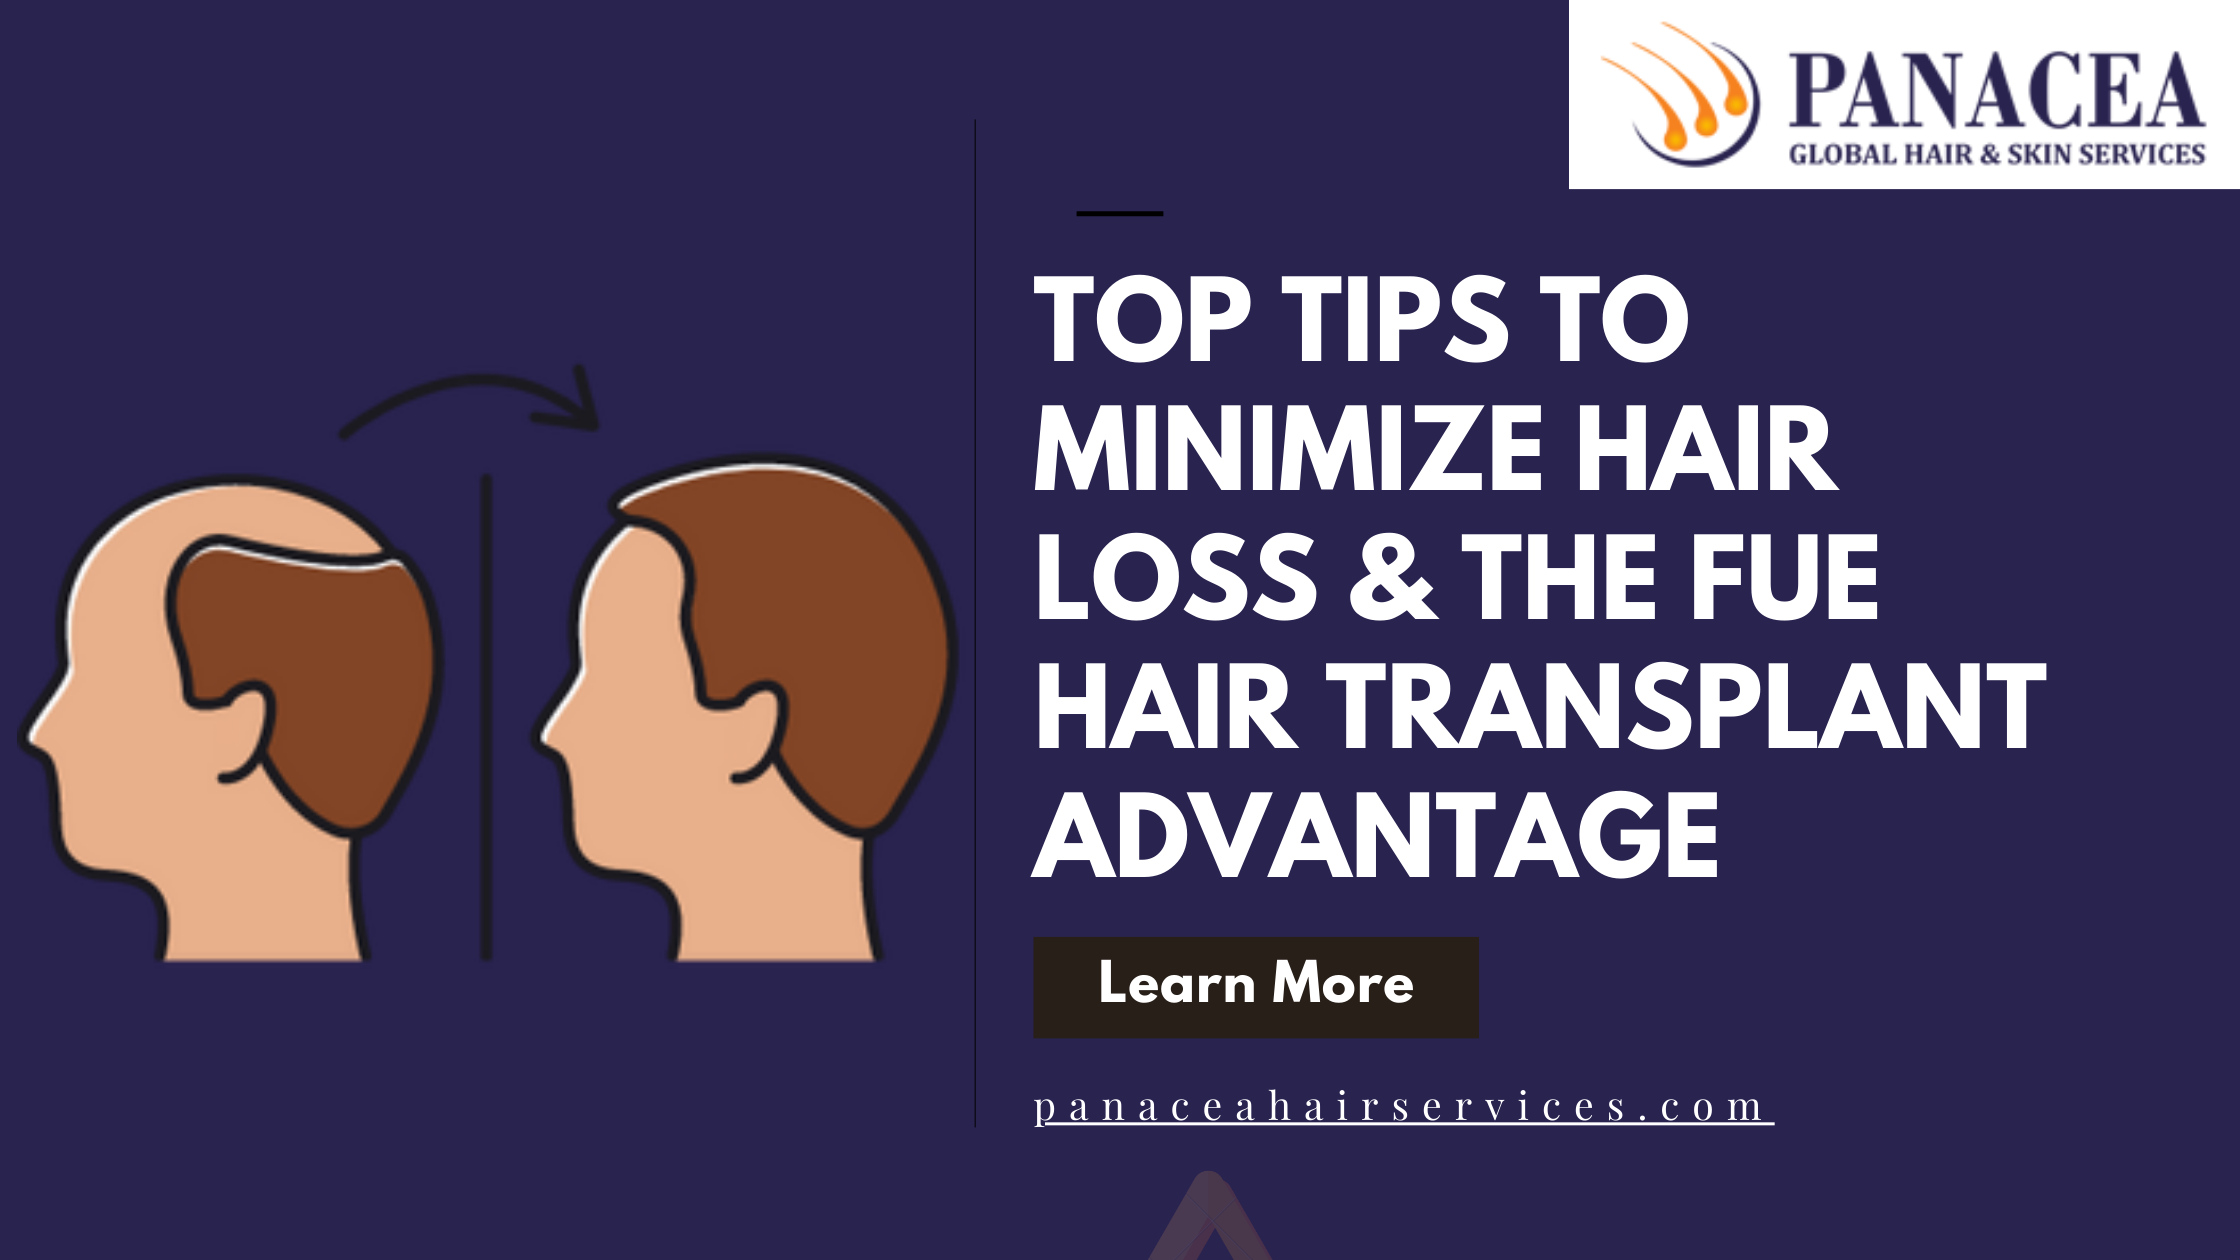 Top Tips to Minimize Hair Loss or the FUE Hair Transplant Advantage